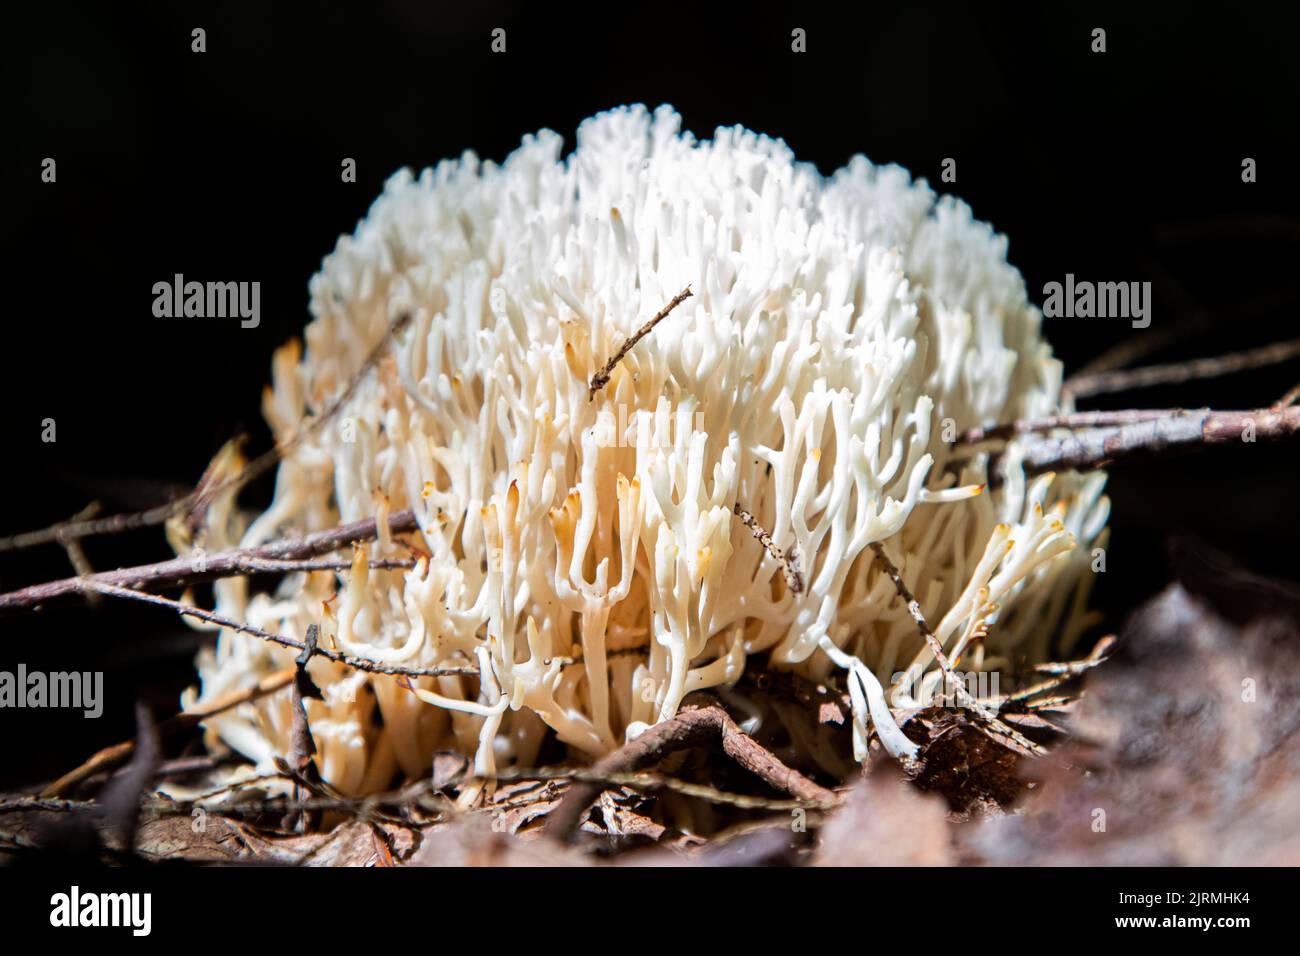 A closeup shot of crown-tipped coral mushrooms with a dark background Stock Photo